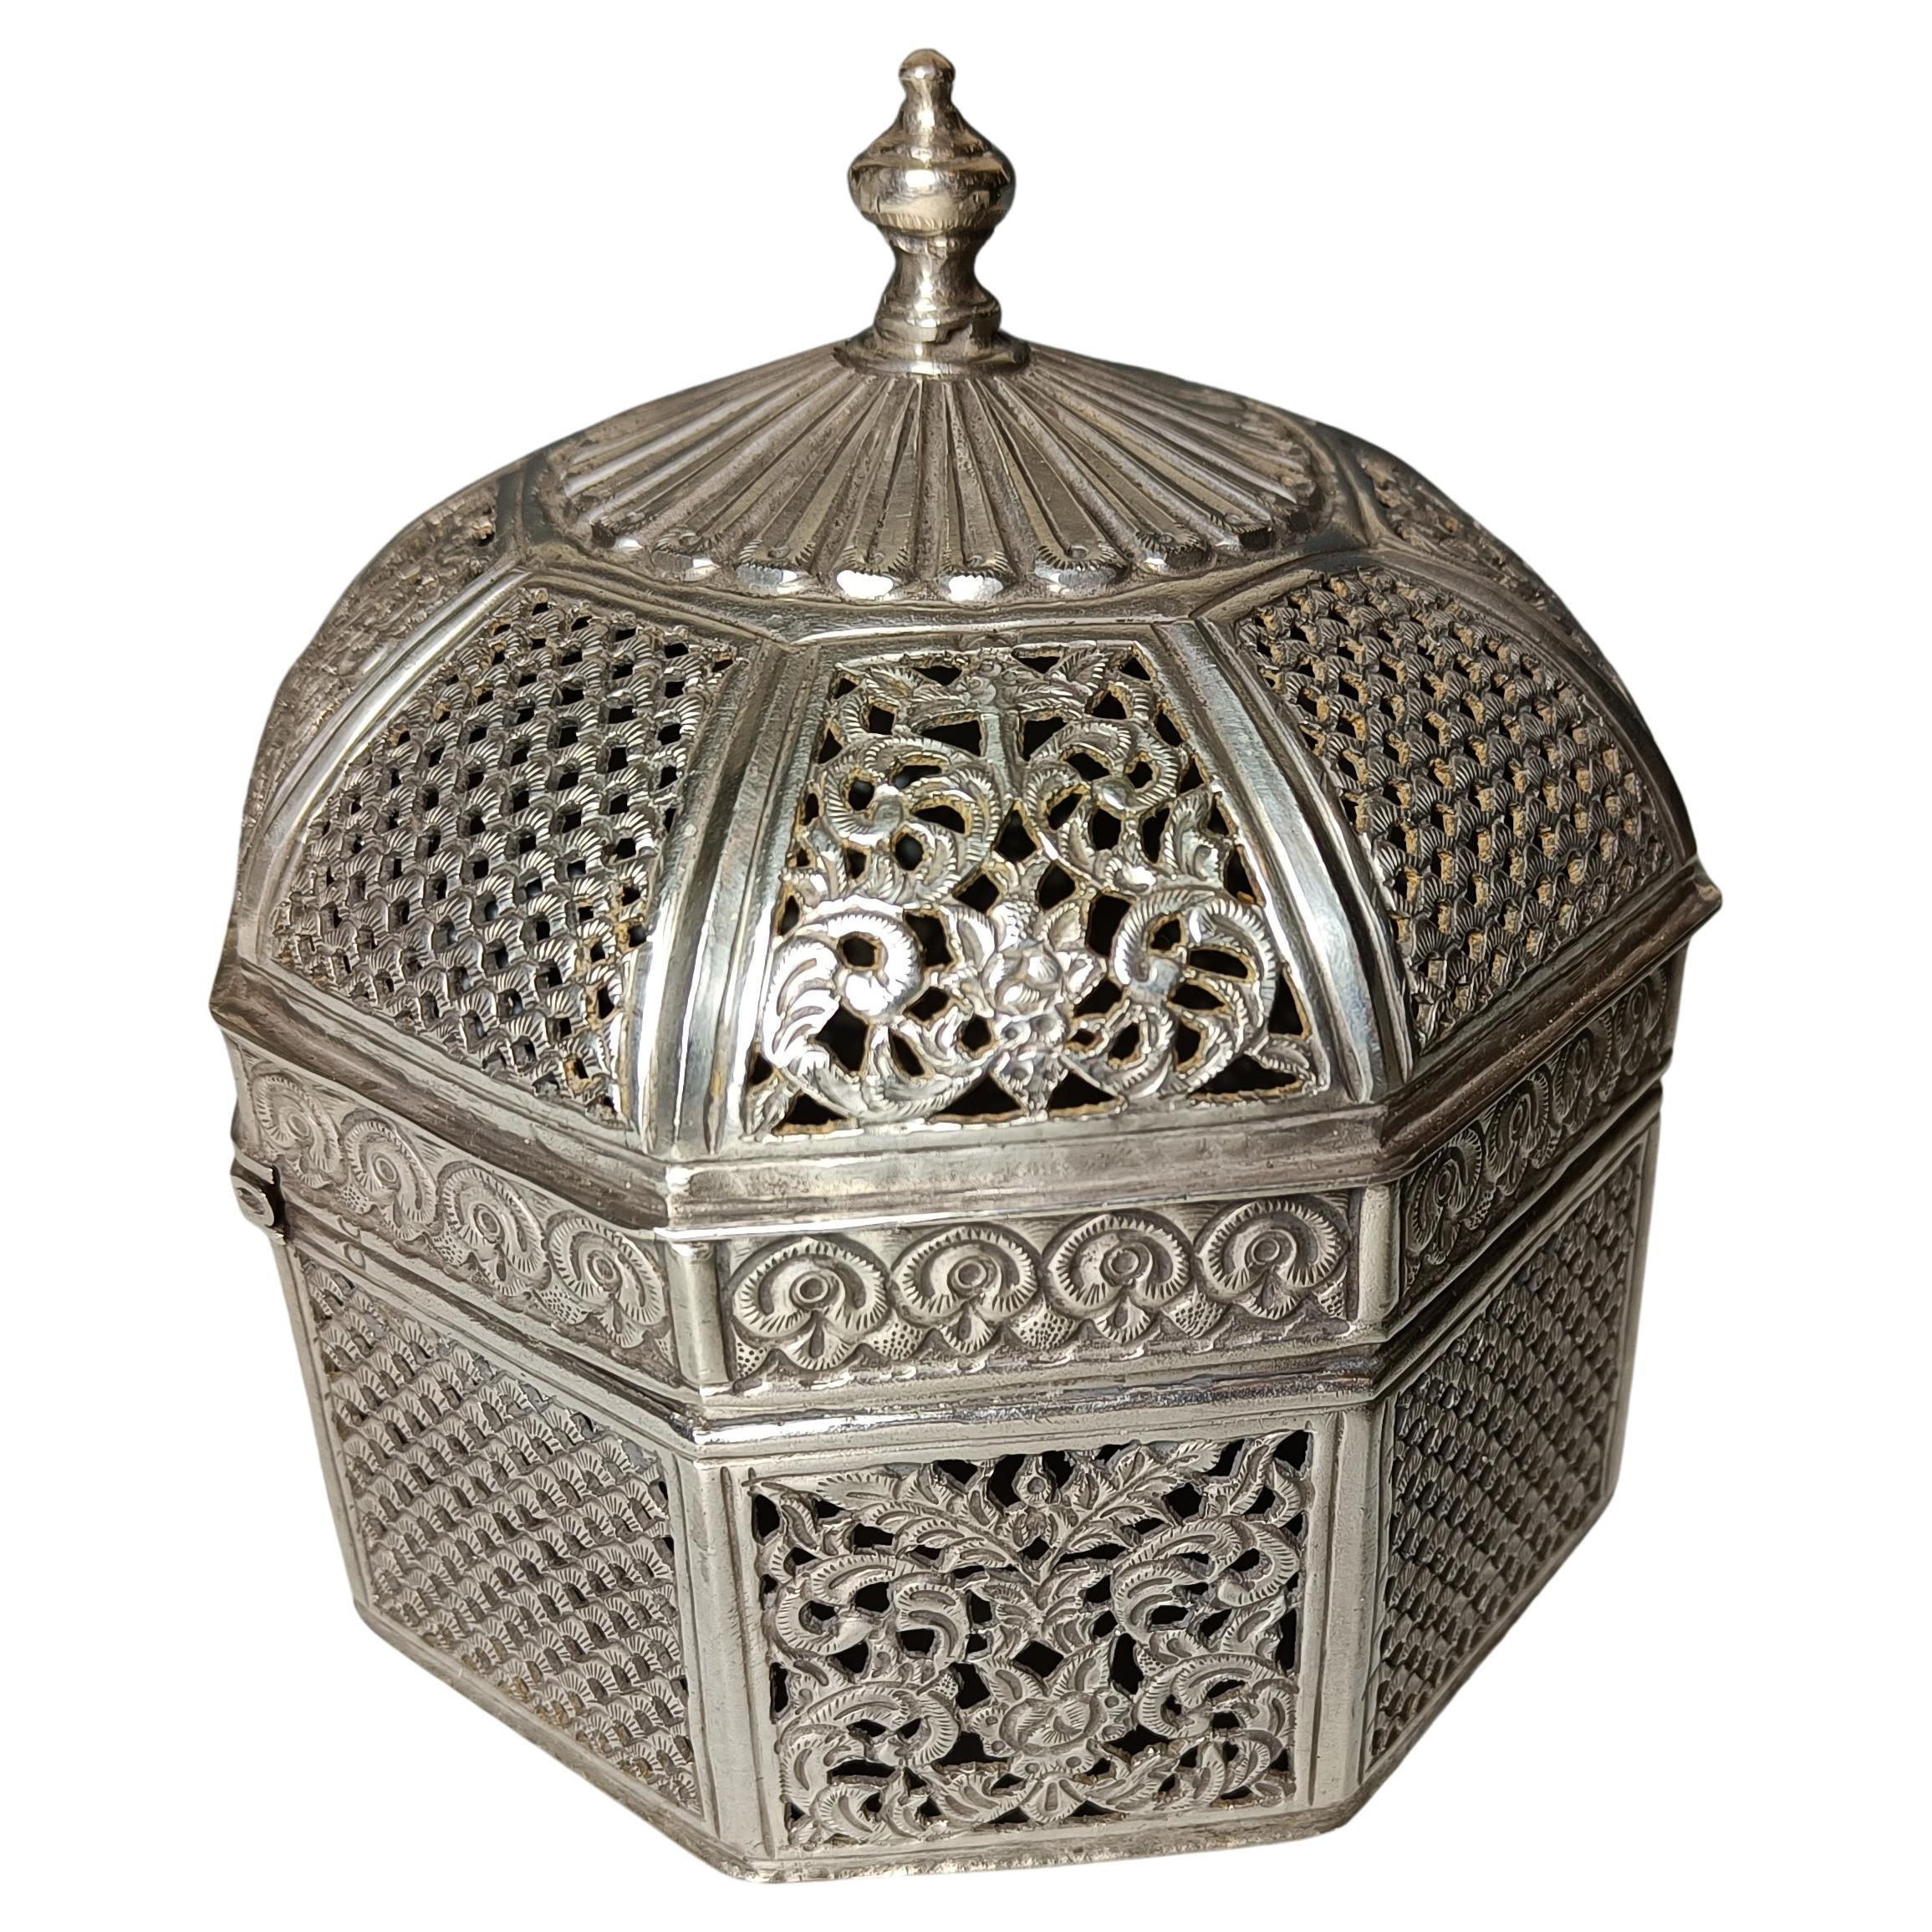 Superb Rare large Octagonal Domed Indian Mughal Silver Box Antiques Asian Art